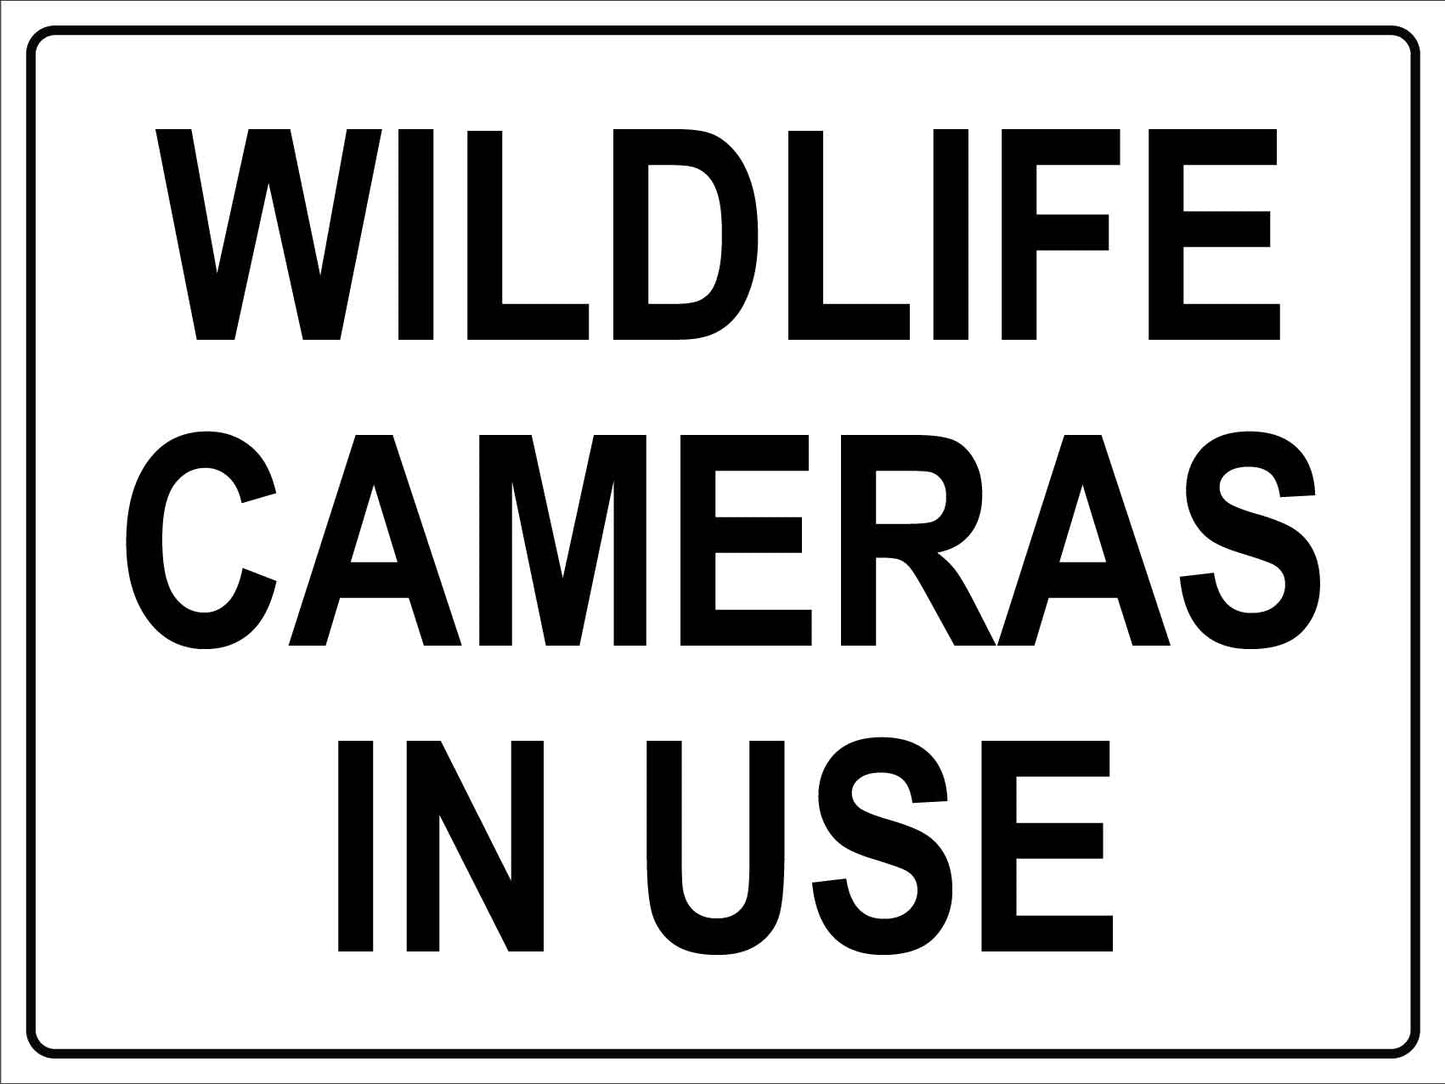 Wildlife Cameras in Use White Sign